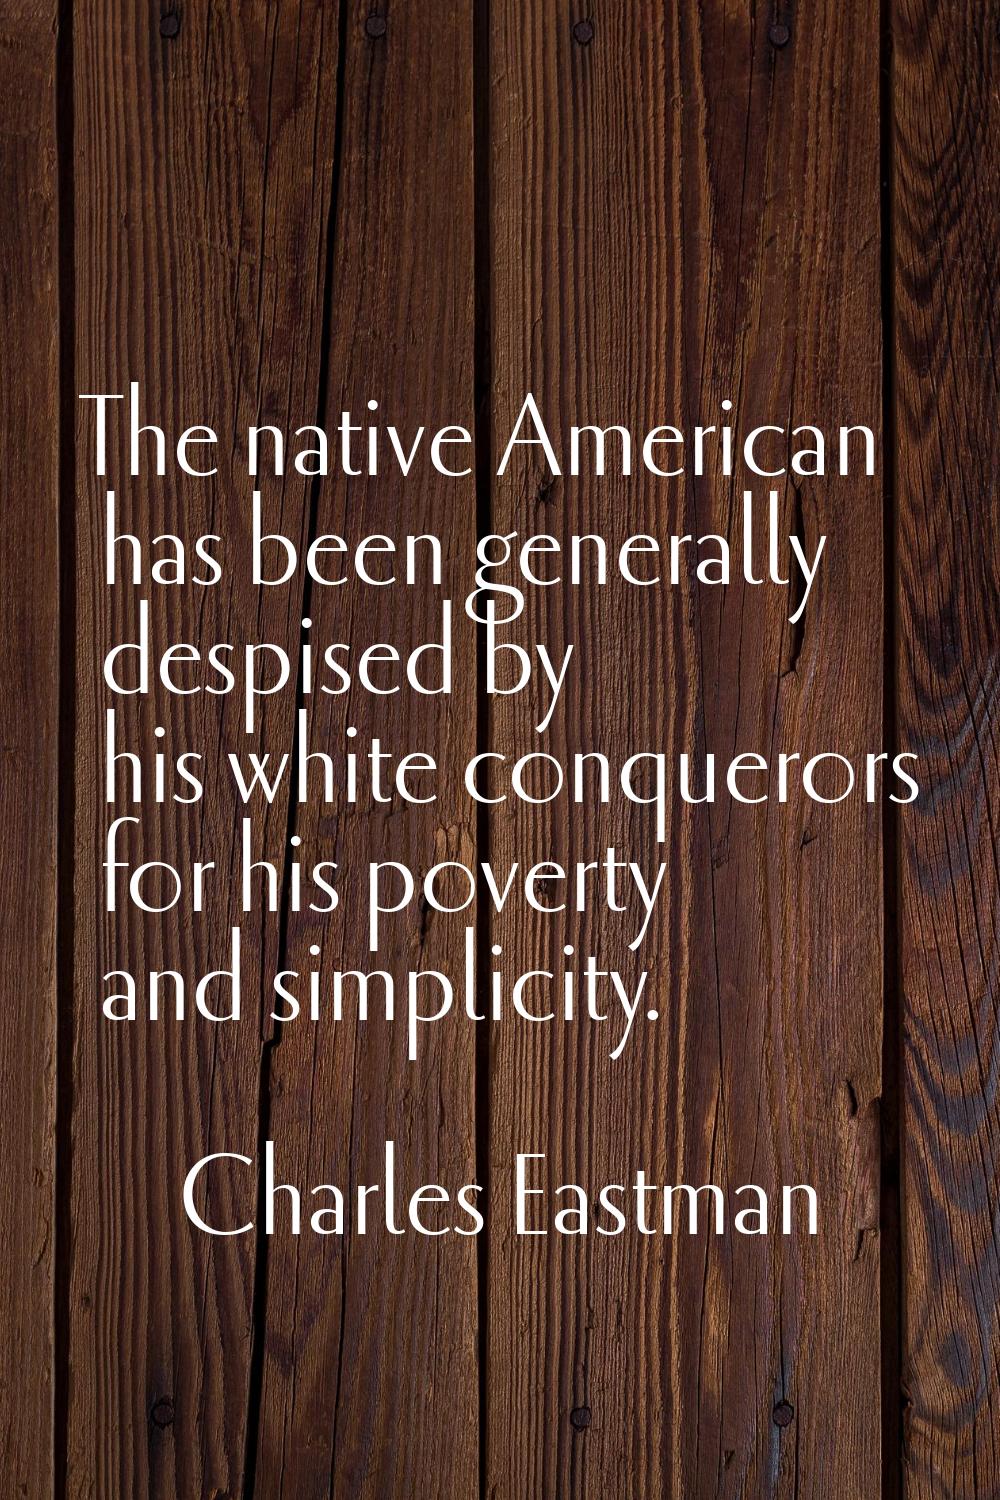 The native American has been generally despised by his white conquerors for his poverty and simplic